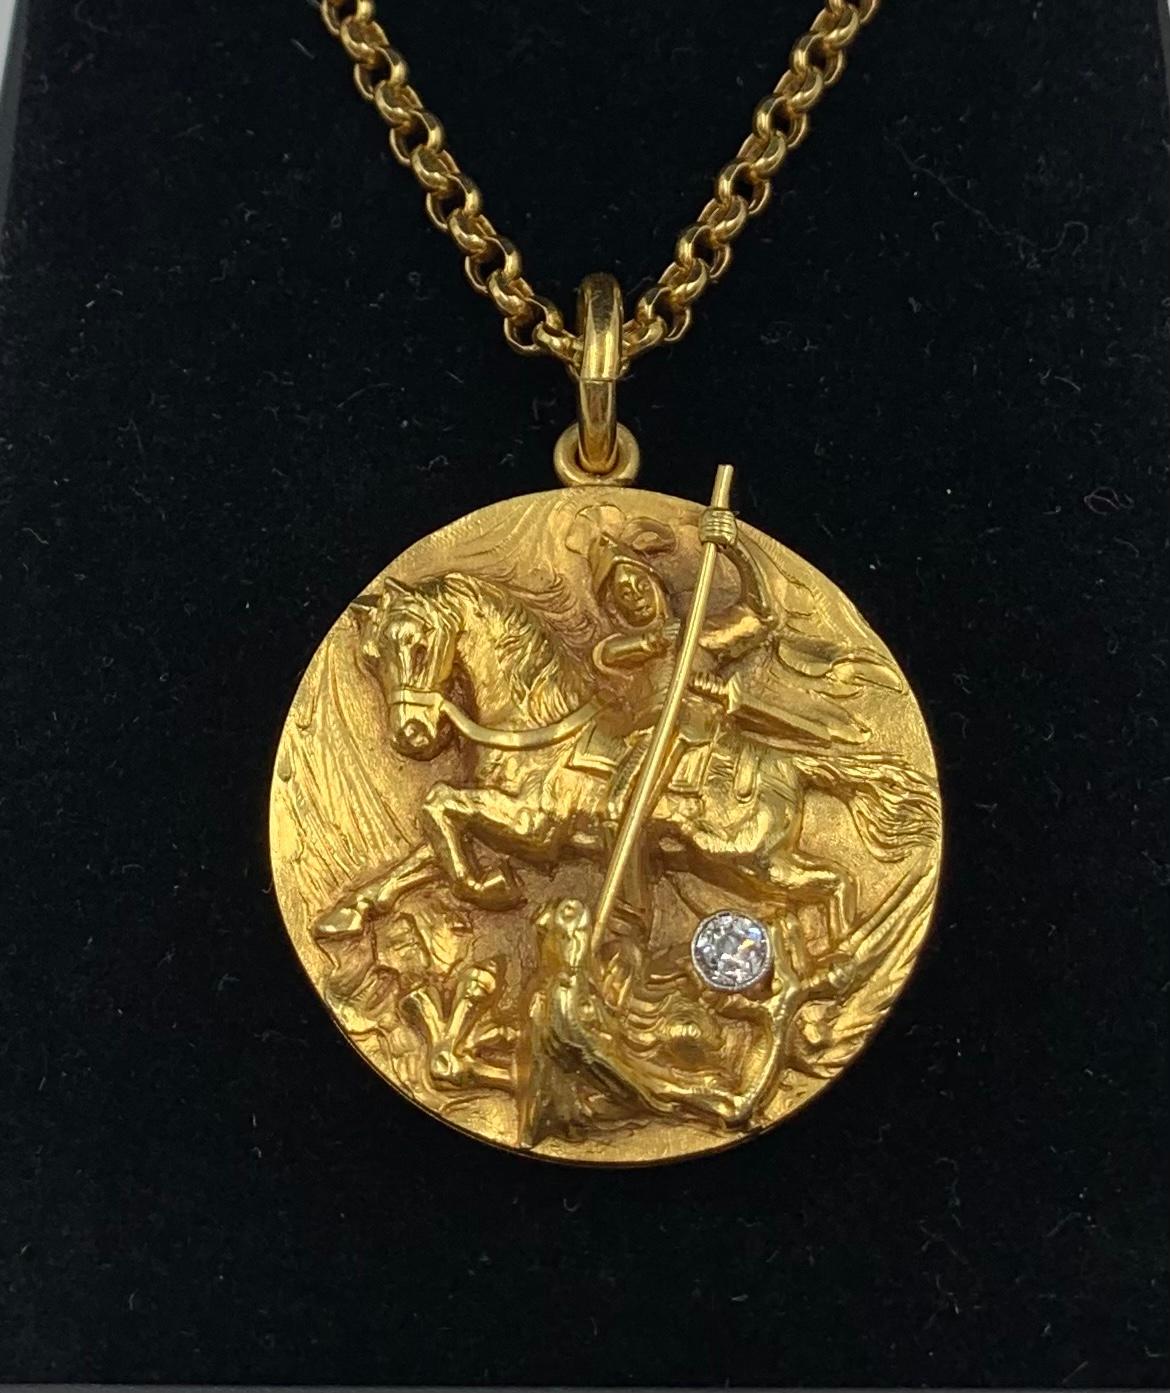 Spectacular 18K gold and diamond Saint George and the Dragon locket on a fabulous 33 inch long faceted 18K gold chain.
Finely hand chiseled in high relief with the dragon clasping a diamond in his claw. 
The interior and back in a lovely matte